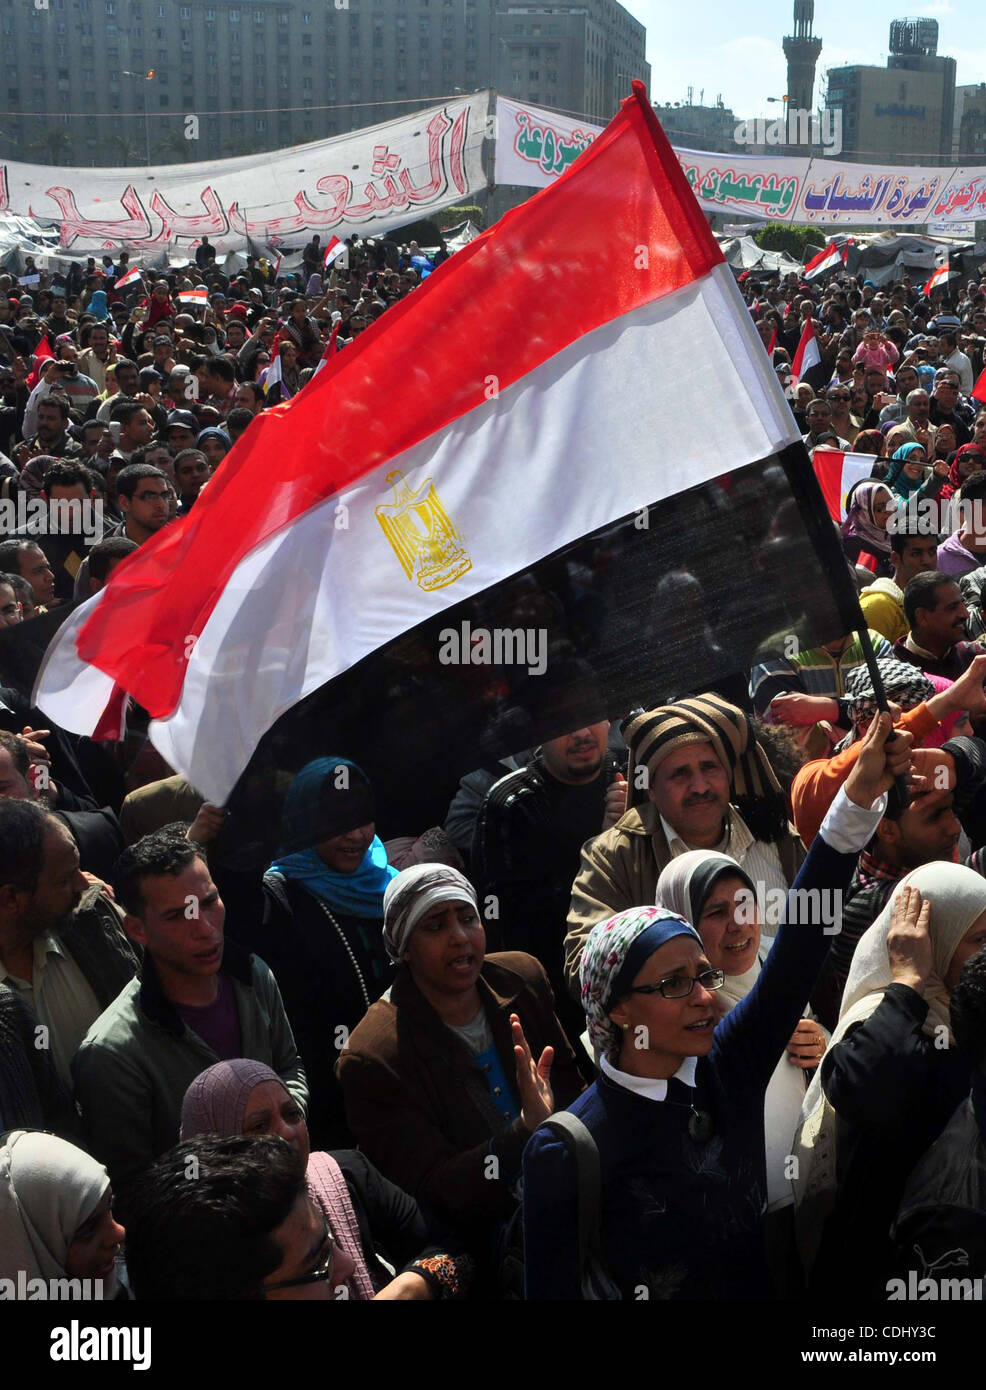 Egyptians celebrate and wave national flags in Tahrir Square in Cairo, Egypt, Saturday, Feb. 12, 2011. Egypt exploded with joy, tears, and relief after pro-democracy protesters brought down President Hosni Mubarak with a momentous march on his palaces and state TV. Mubarak, who until the end seemed  Stock Photo